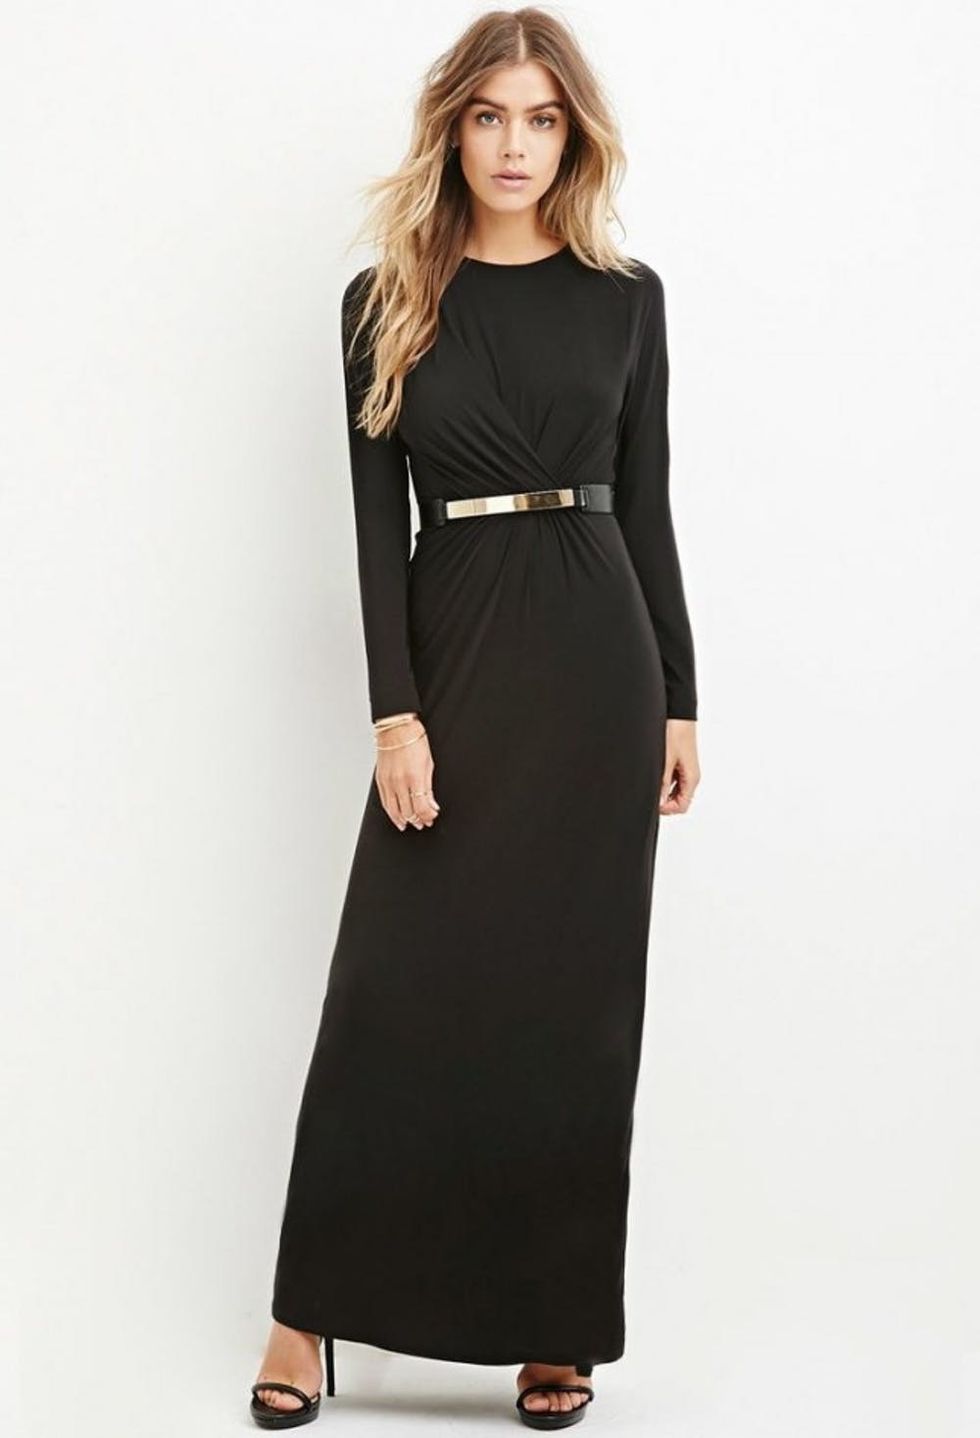 15 Stunning Dresses to Wear to a Winter Wedding - Brit + Co